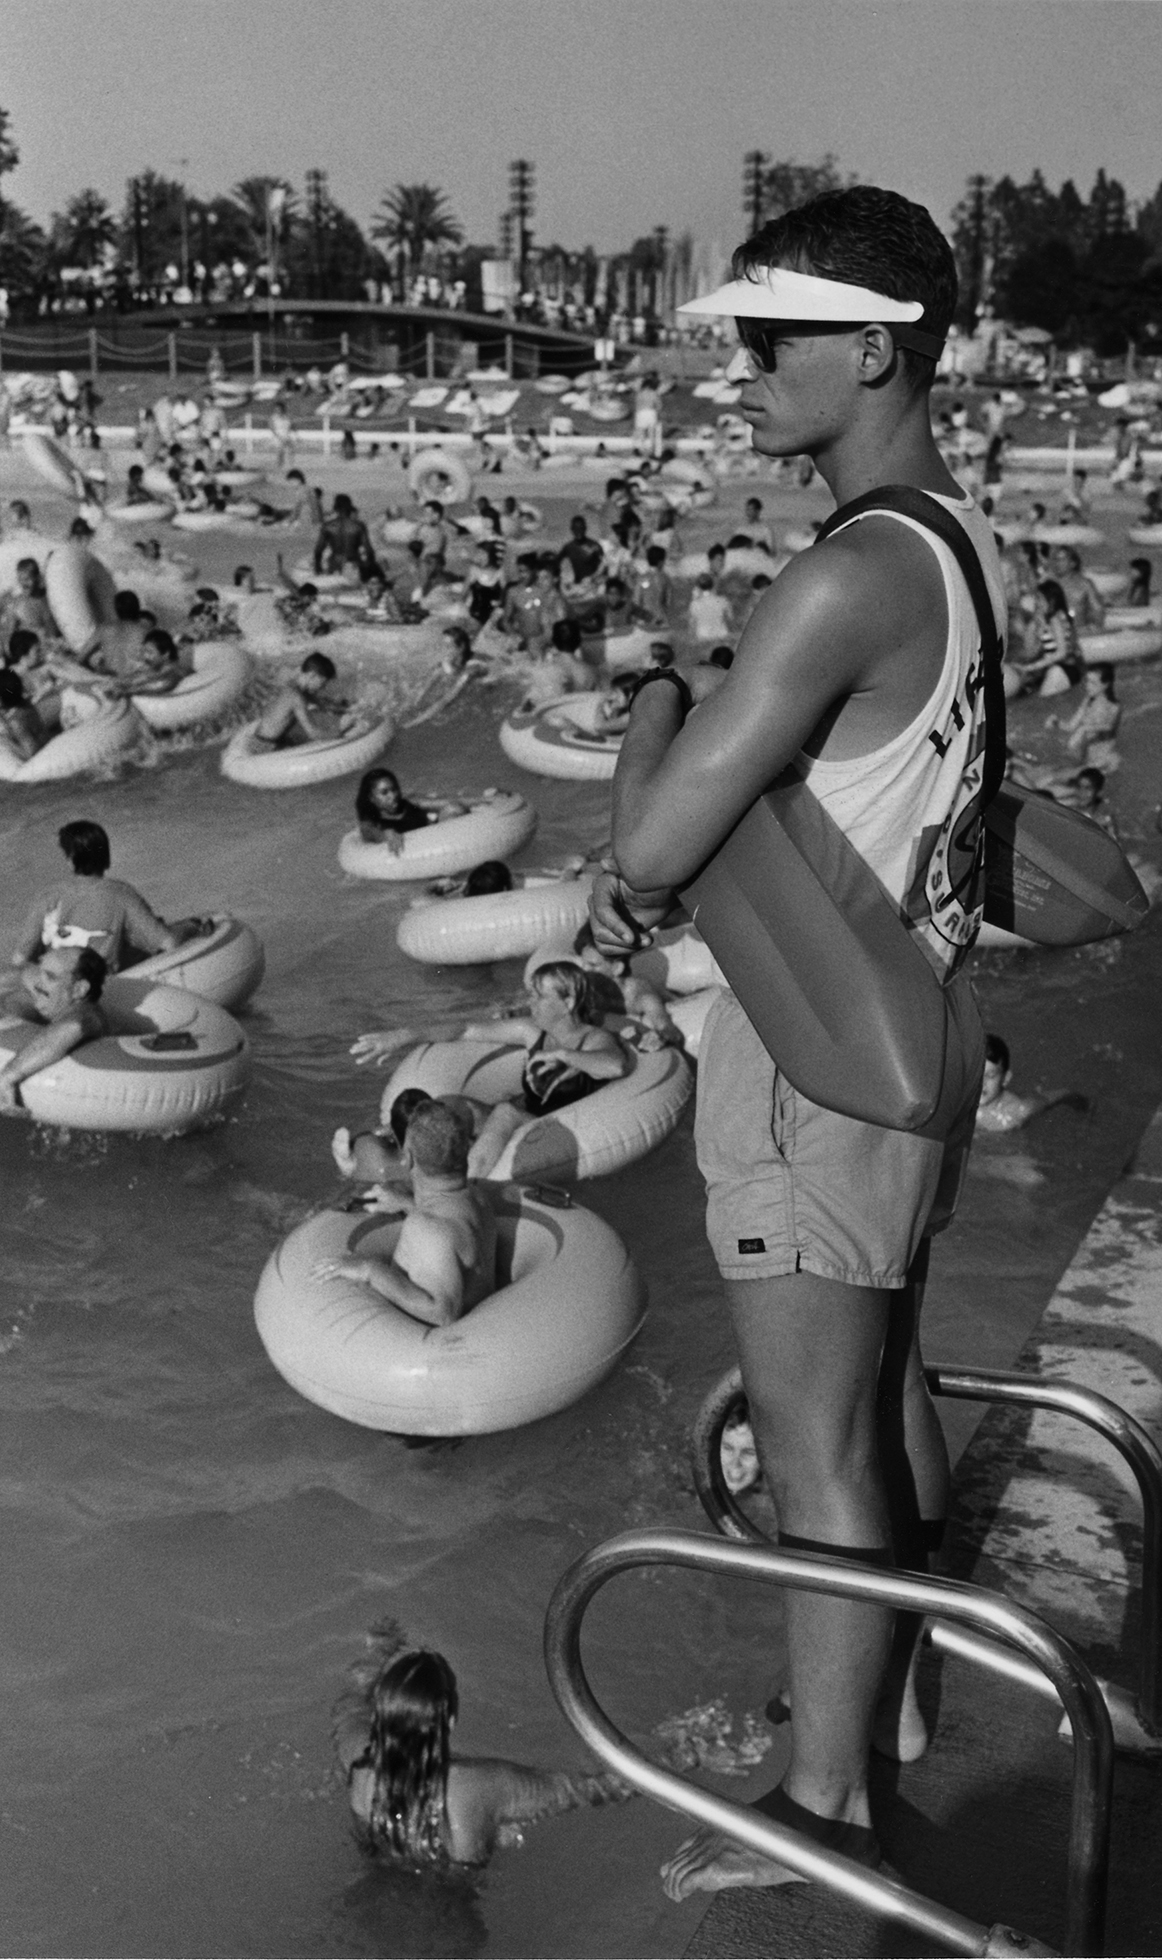 A male lifeguard wearing a visor, sunscreen on his nose, and sunglasses is standing along the edge of a pool. He’s looking off in the distance. Beyond him are clusters of people floating in innertubes.